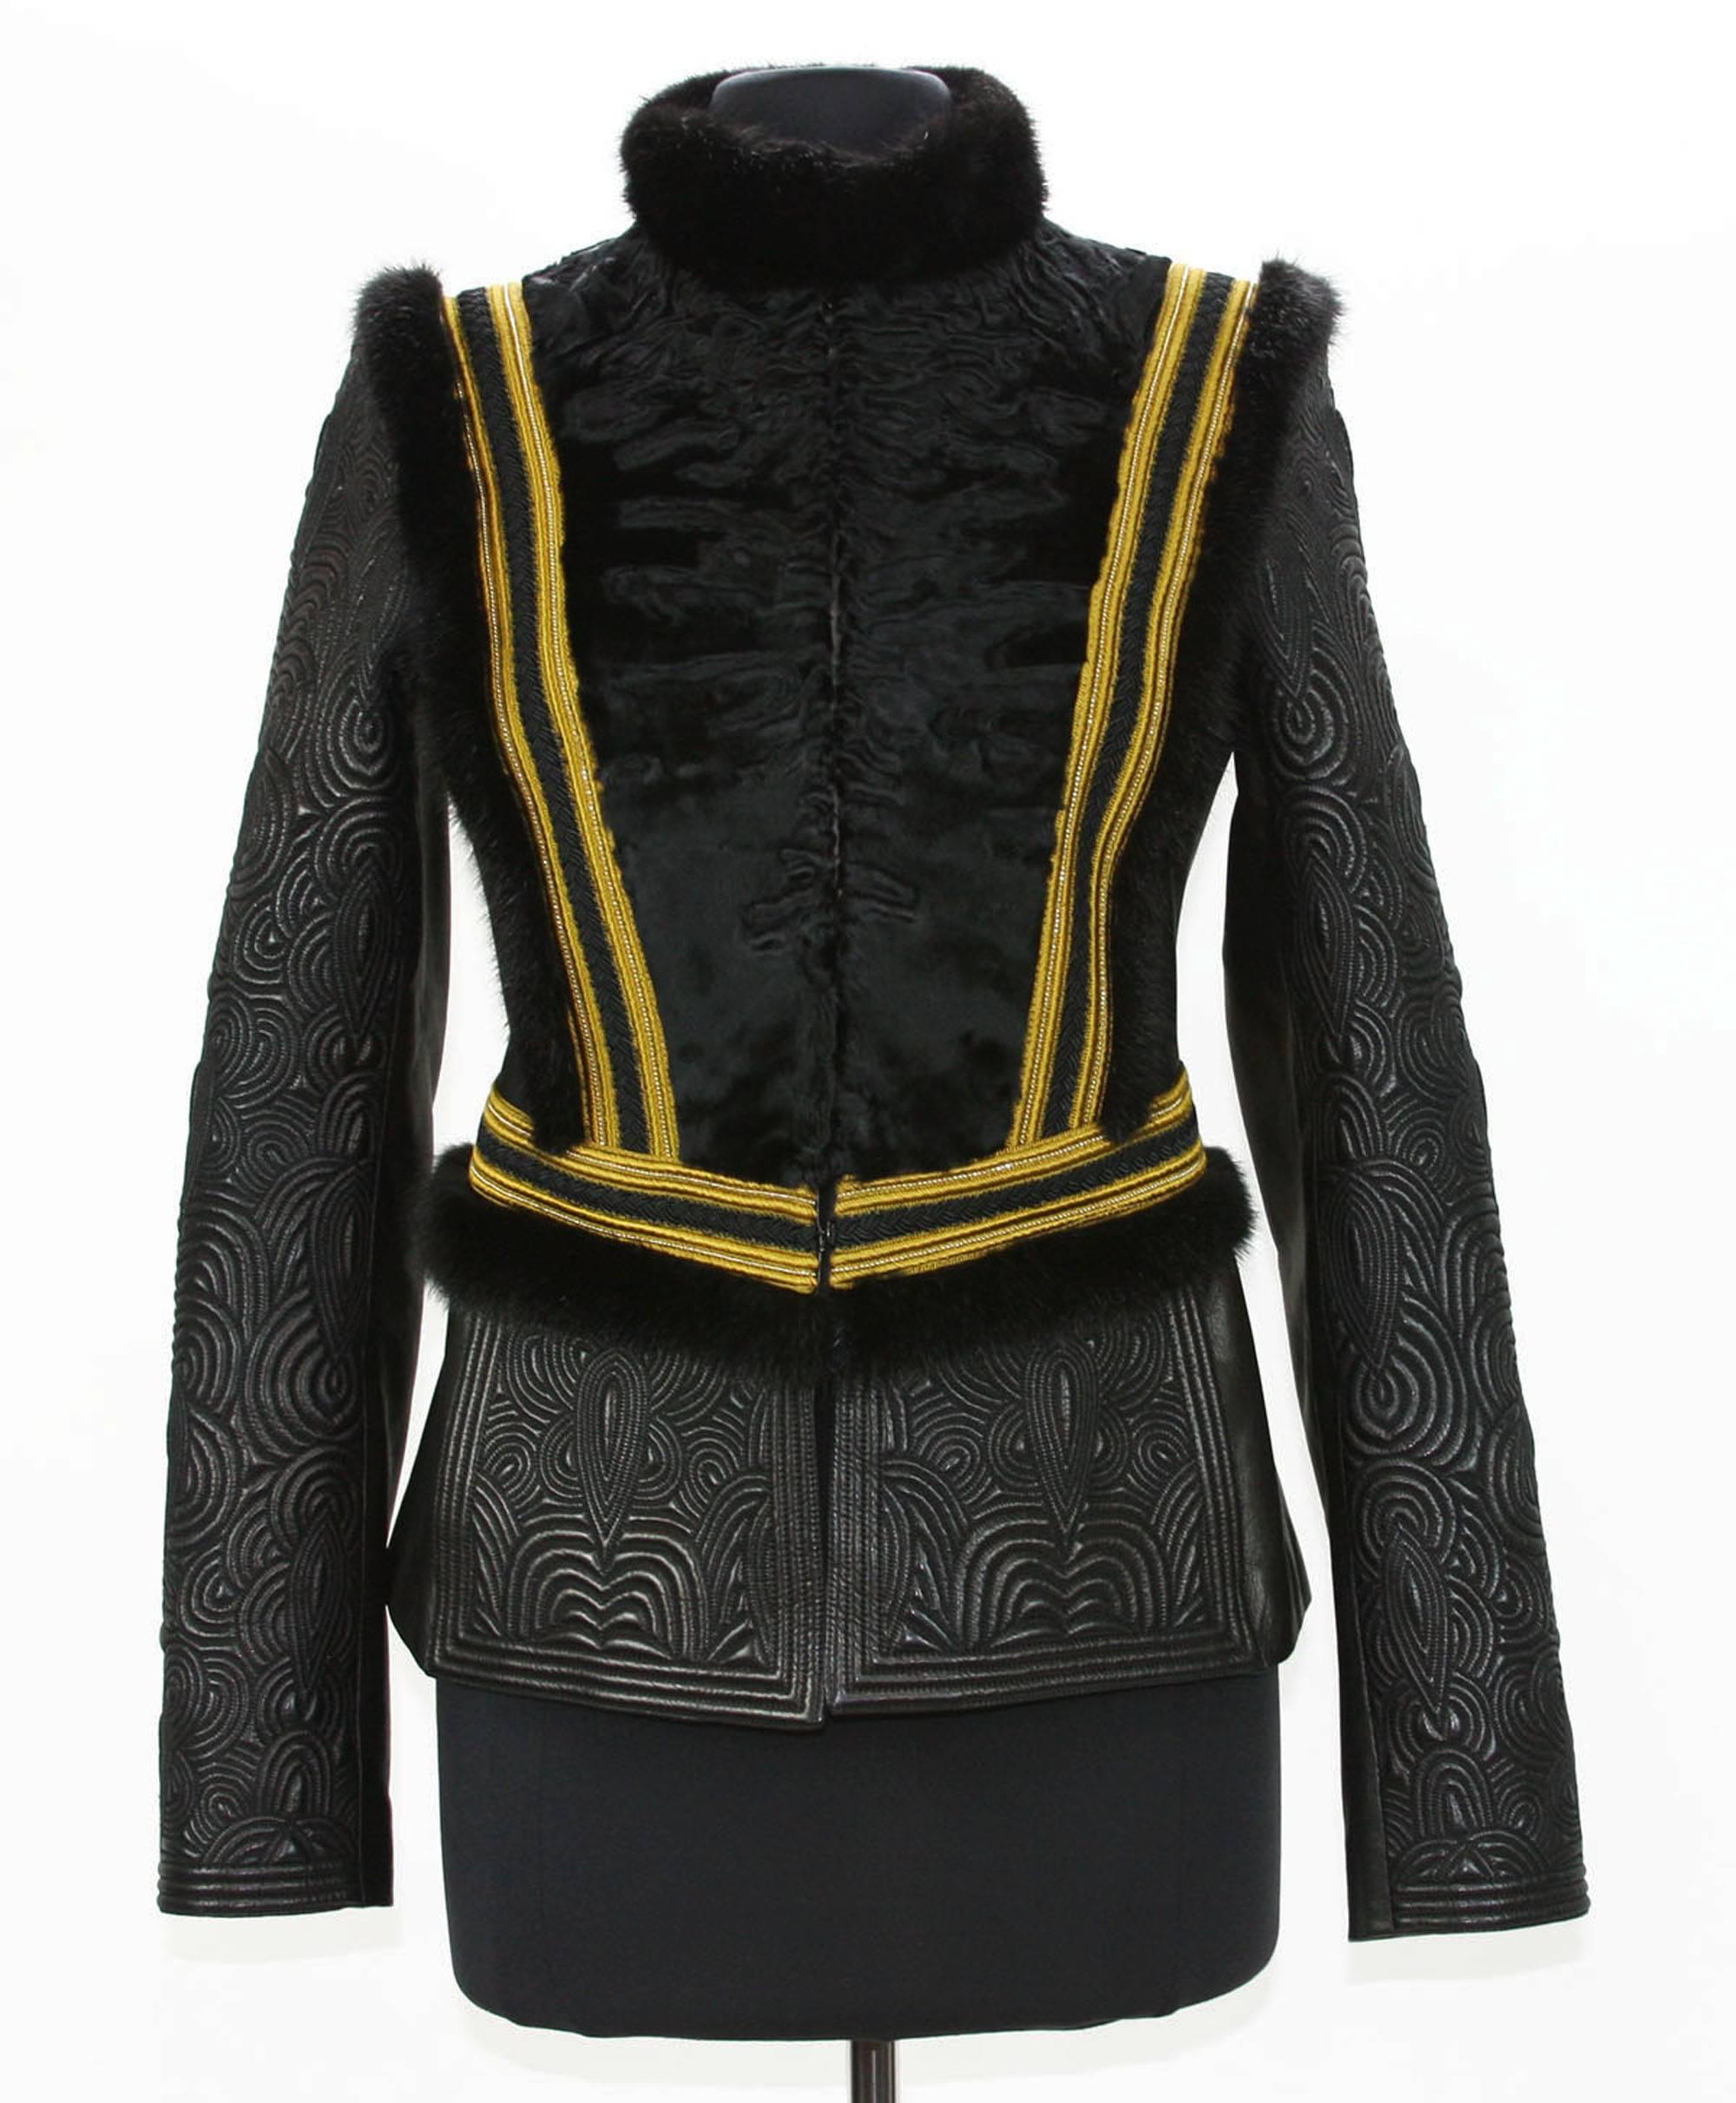 New Exquisite Etro Embossed Leather Mink Fur Lamb Jacket.
Italian Size: 42  – US 6 
Color – Black.
Embossed 90% Lambskin – Super Soft.
10% Real (dyed) Mink - Finland.
Yellow (not bright) Metallic ribbon piping around bodice.
Two Front Pockets, Stand